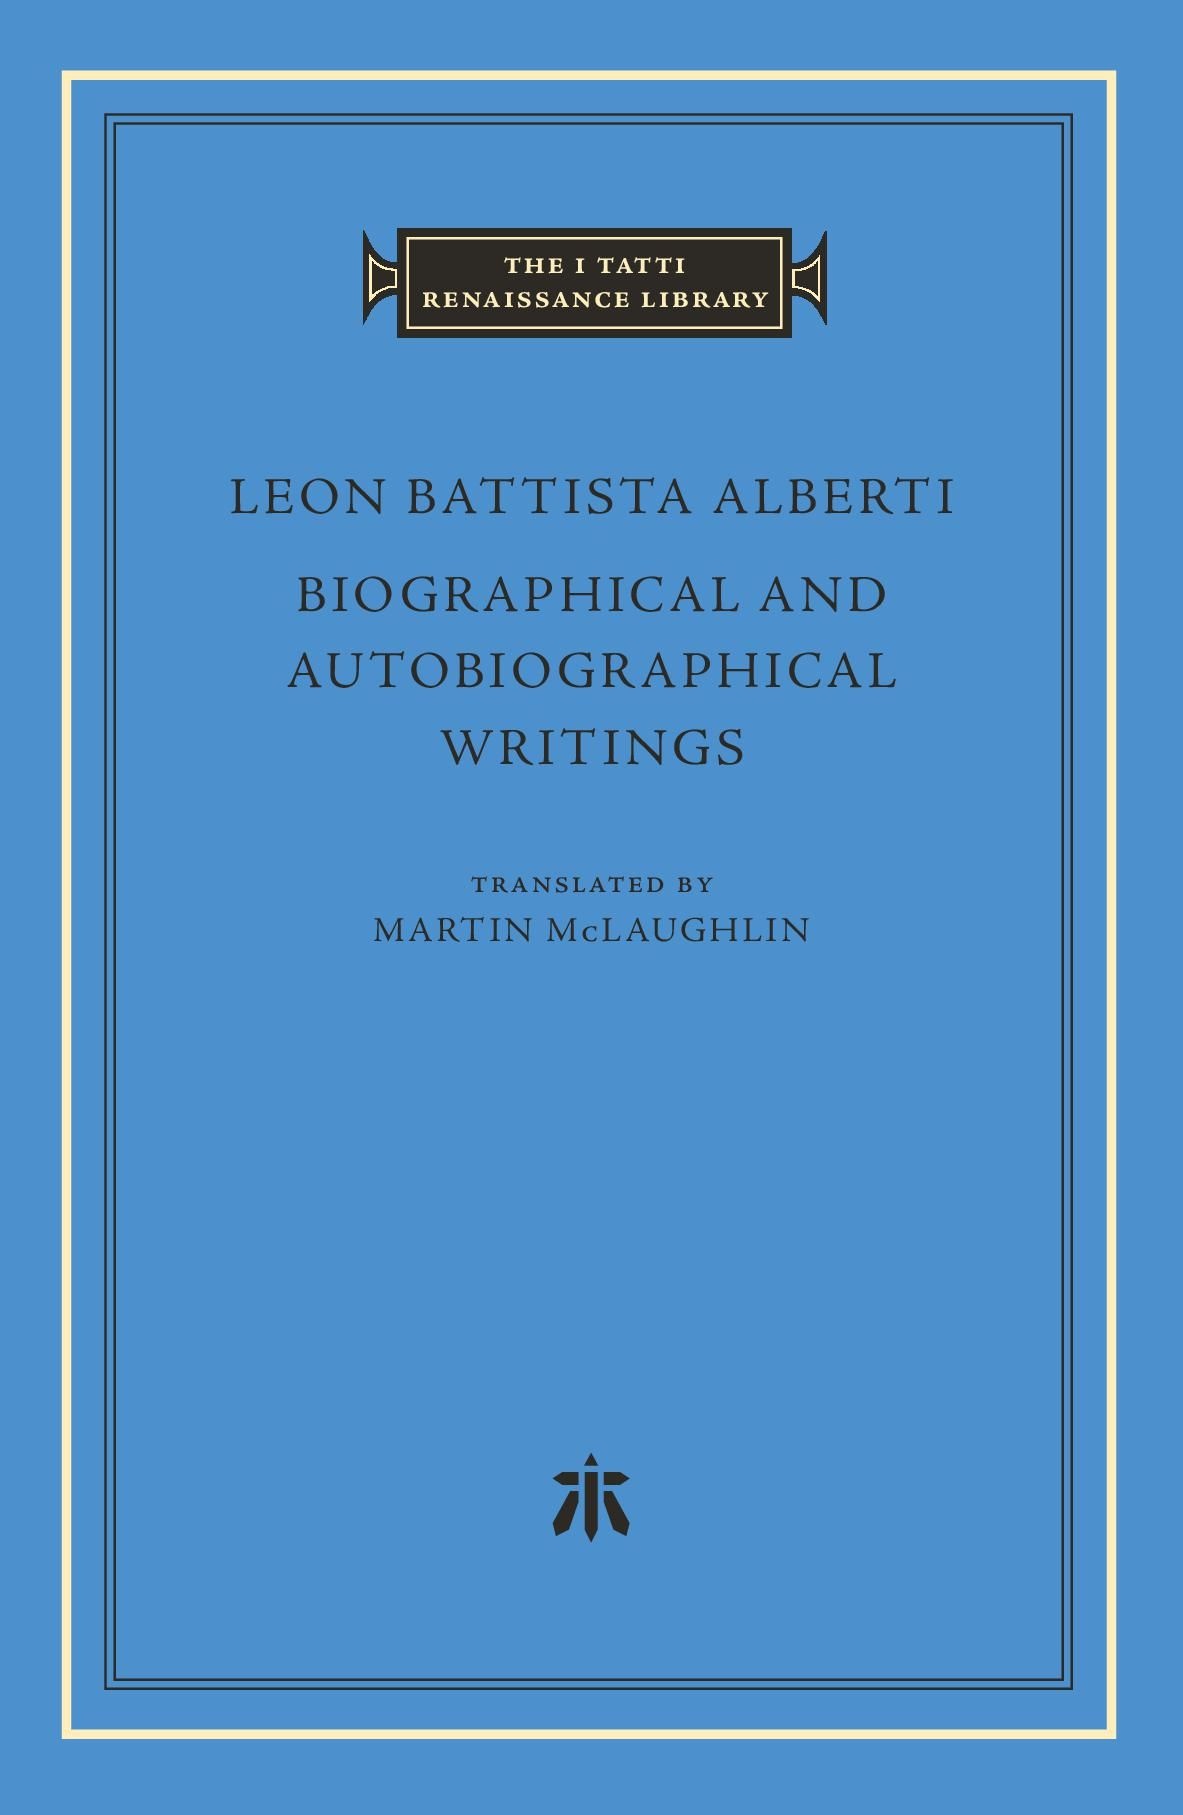 Biographical and Autobiographical Writings